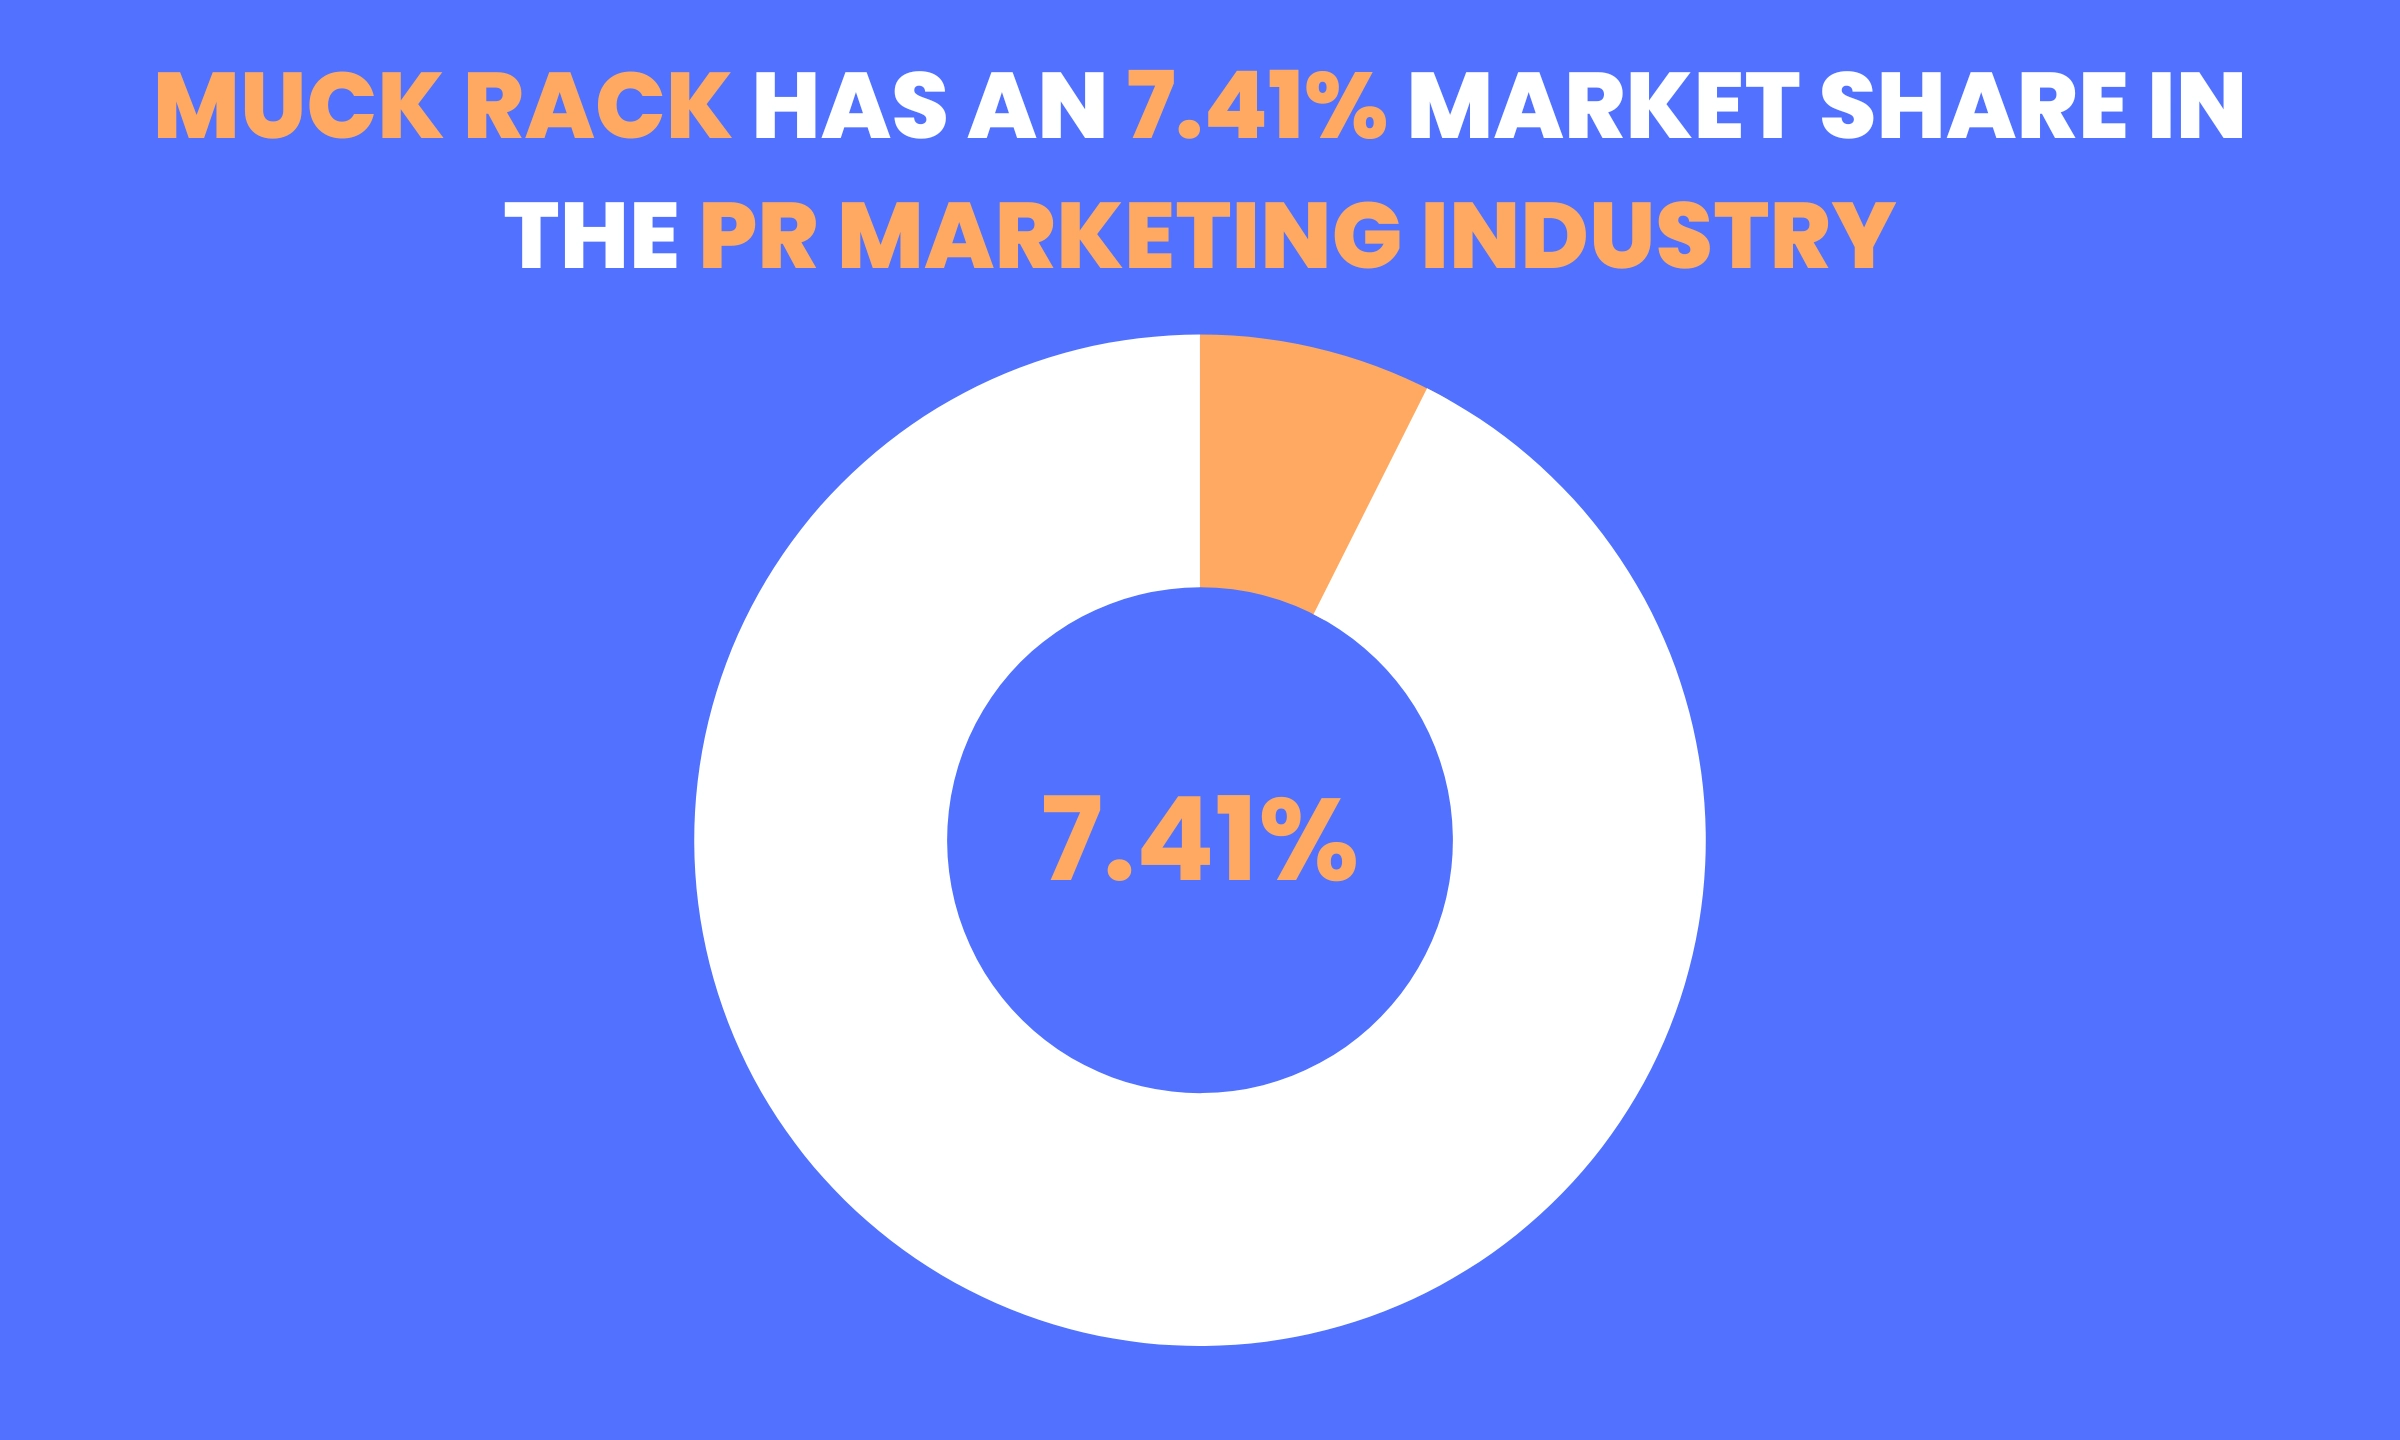 Muck Rack's market share of 7.41% in the PR-marketing industry